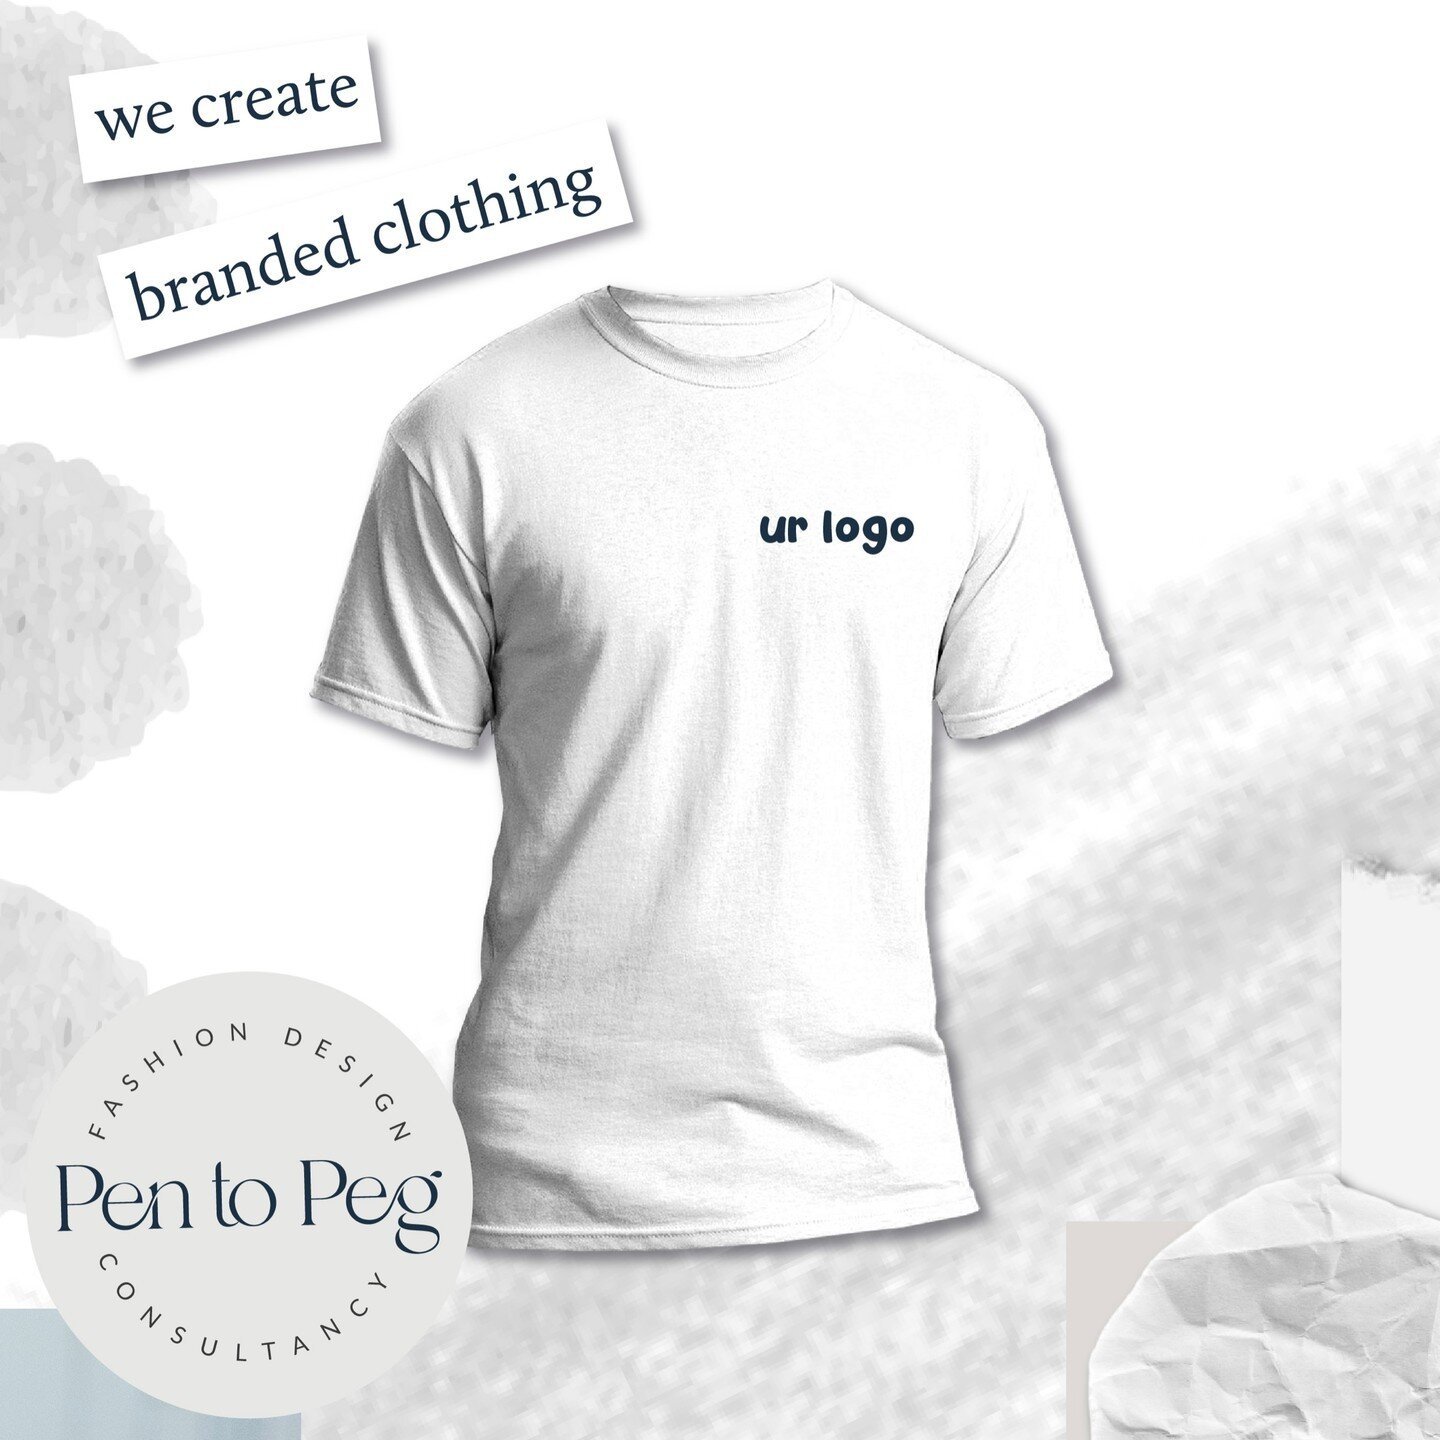 es we design, but we also supply branded goods.👕✔️

So if your business needs a T-shirt, Polo, Sweatshirt with a logo, we can get that done for you.👍

We have a stock catalogue with 100's of styles for men, women and kids.😀

Just tell us your colo